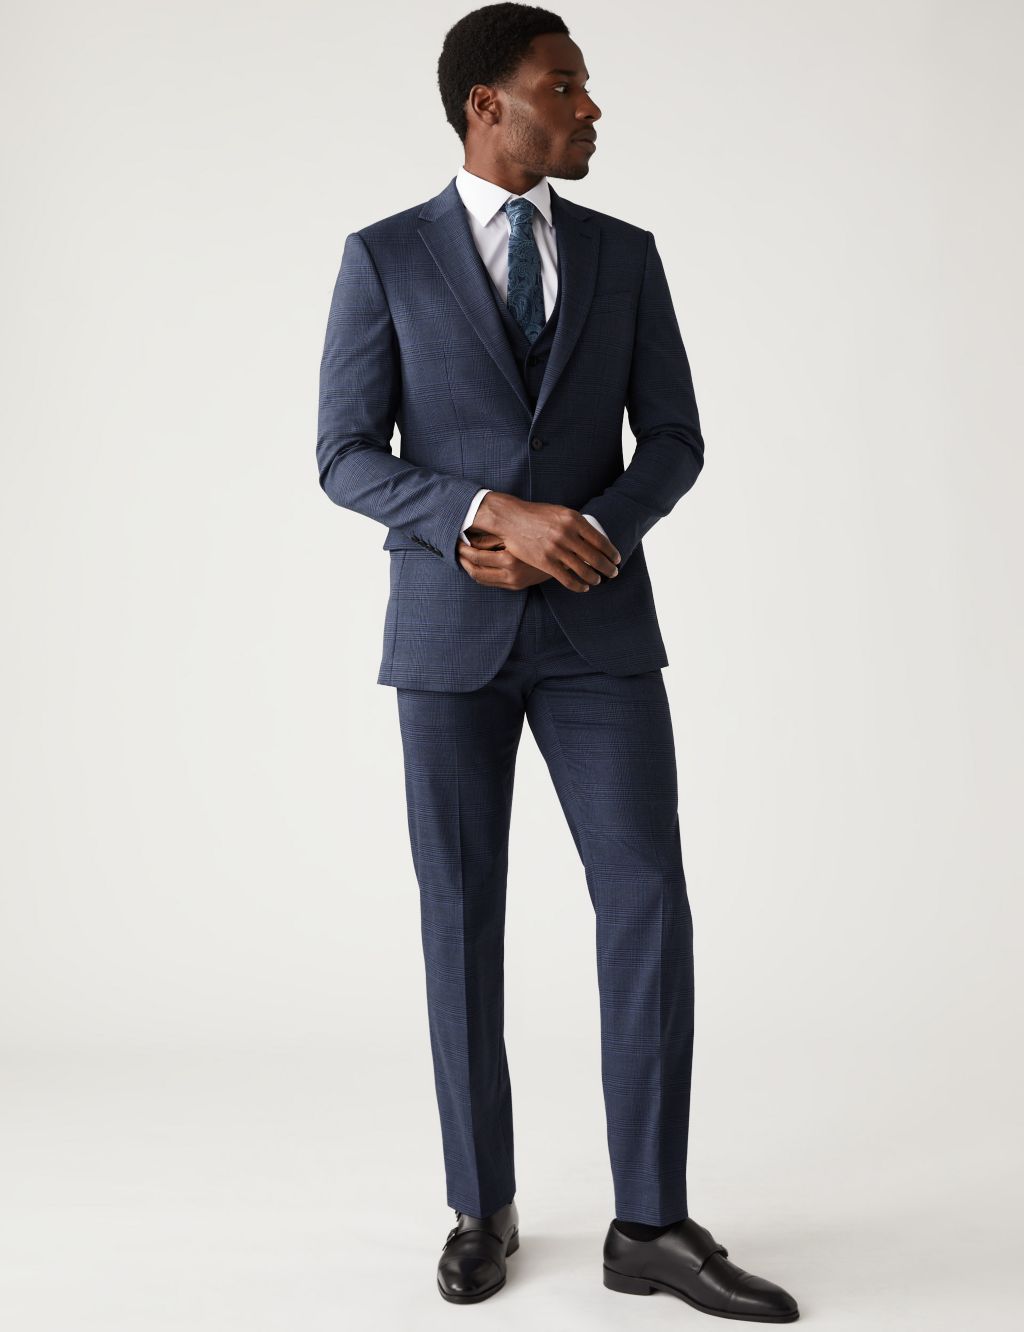 Regular Fit Prince of Wales Check Suit image 1